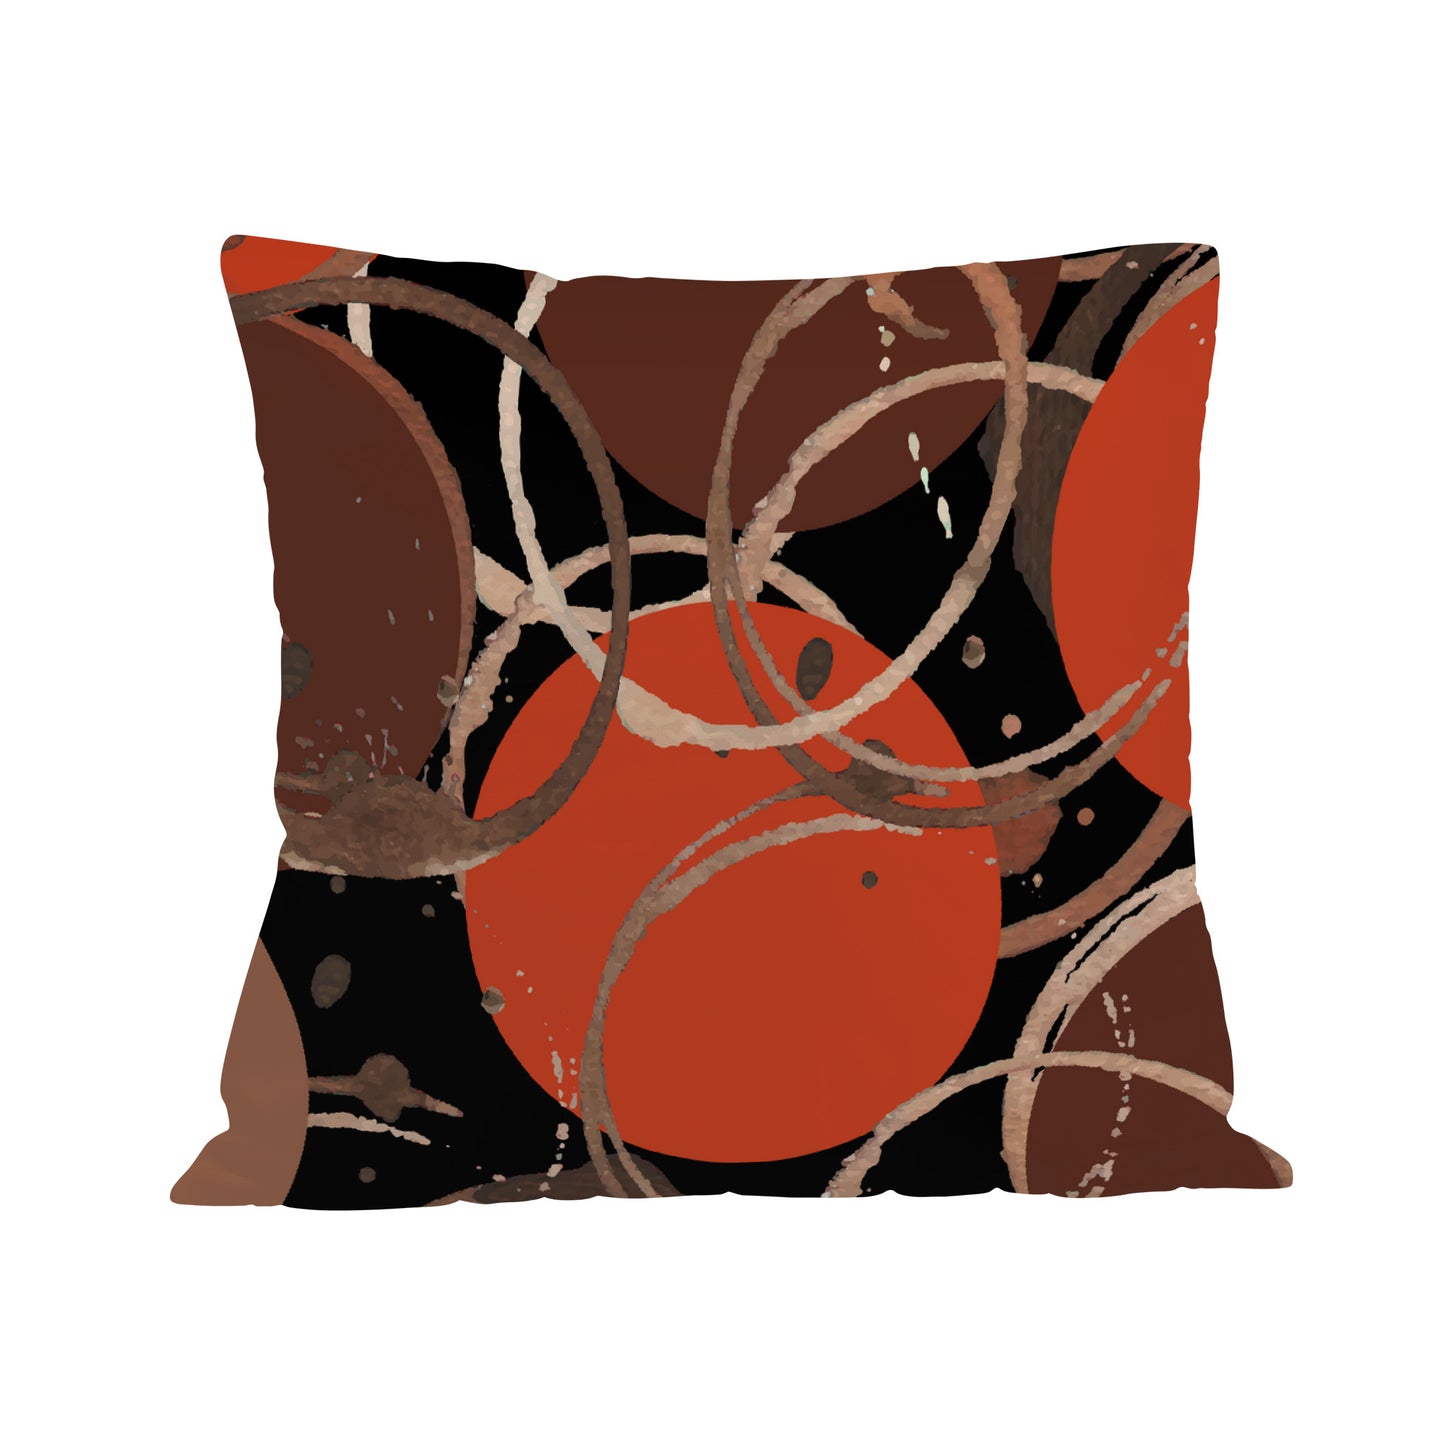 Pillow Covers- Rust & Brown